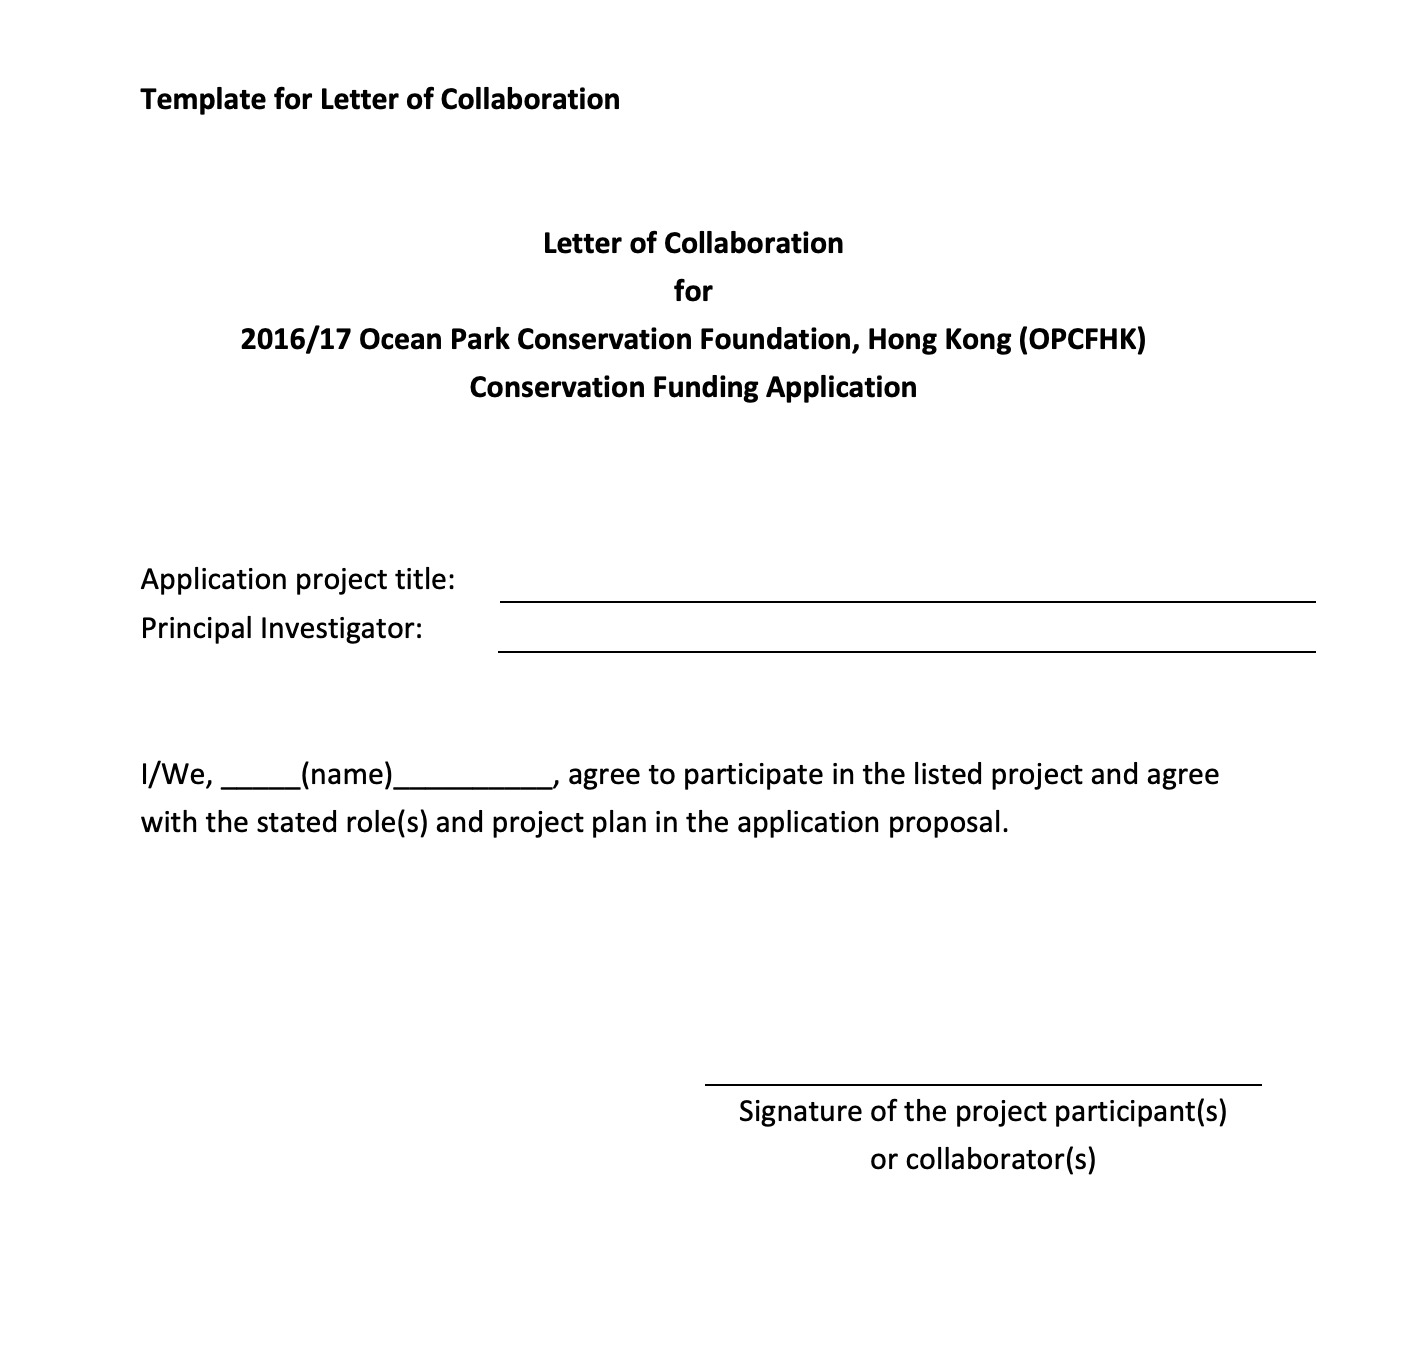 template for letter of collaboration